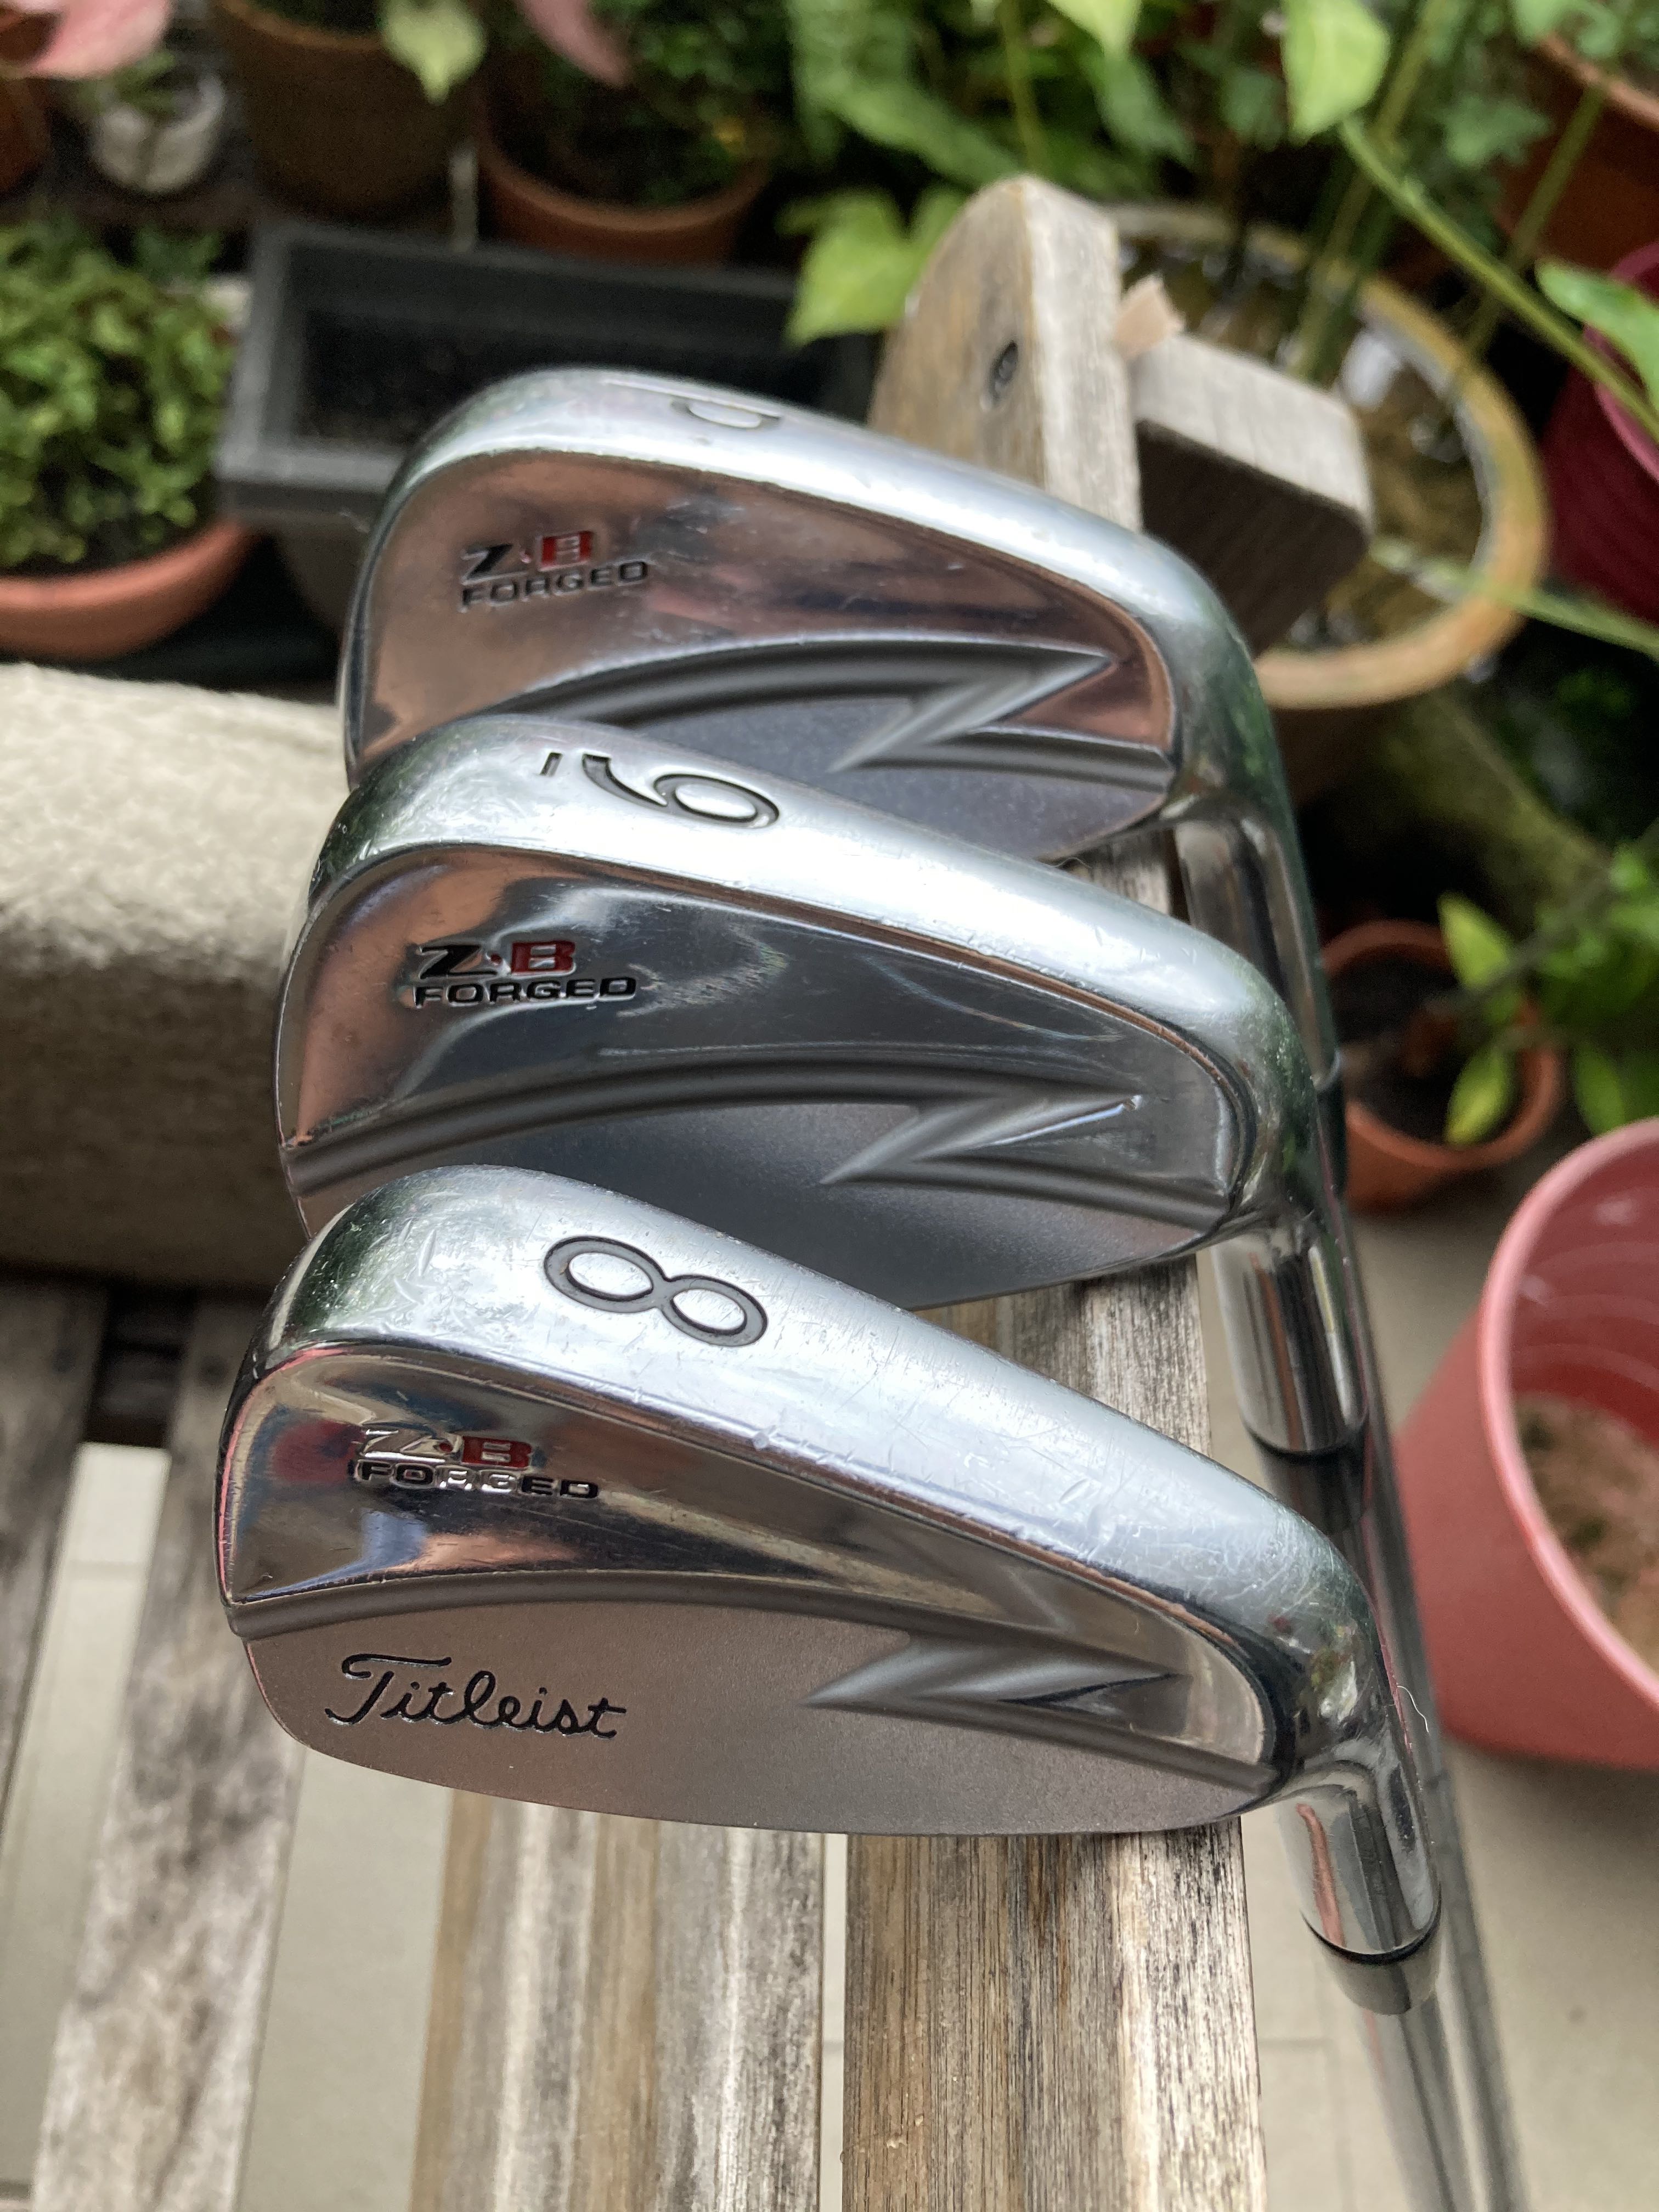 Titleist ZB forged irons nspro modus 